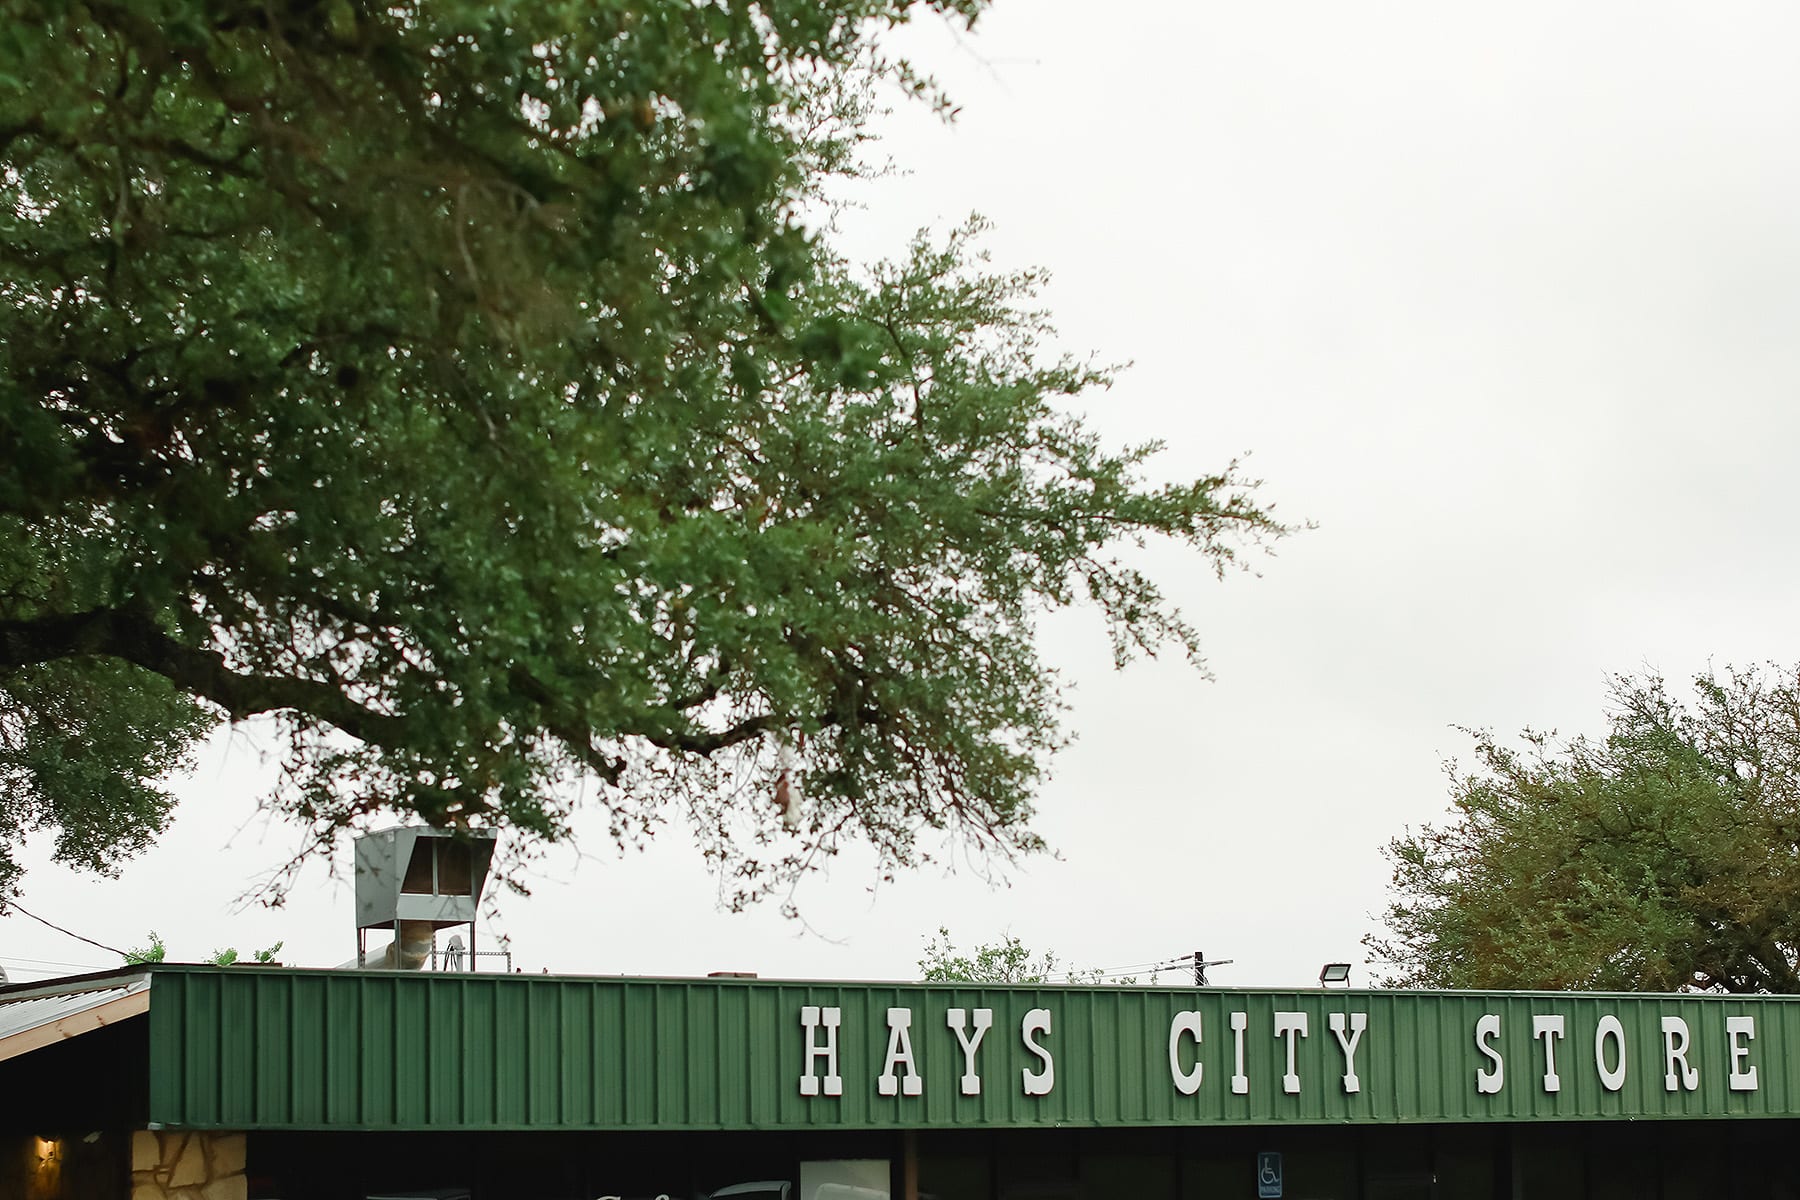 Hays City Store in Driftwood Texas